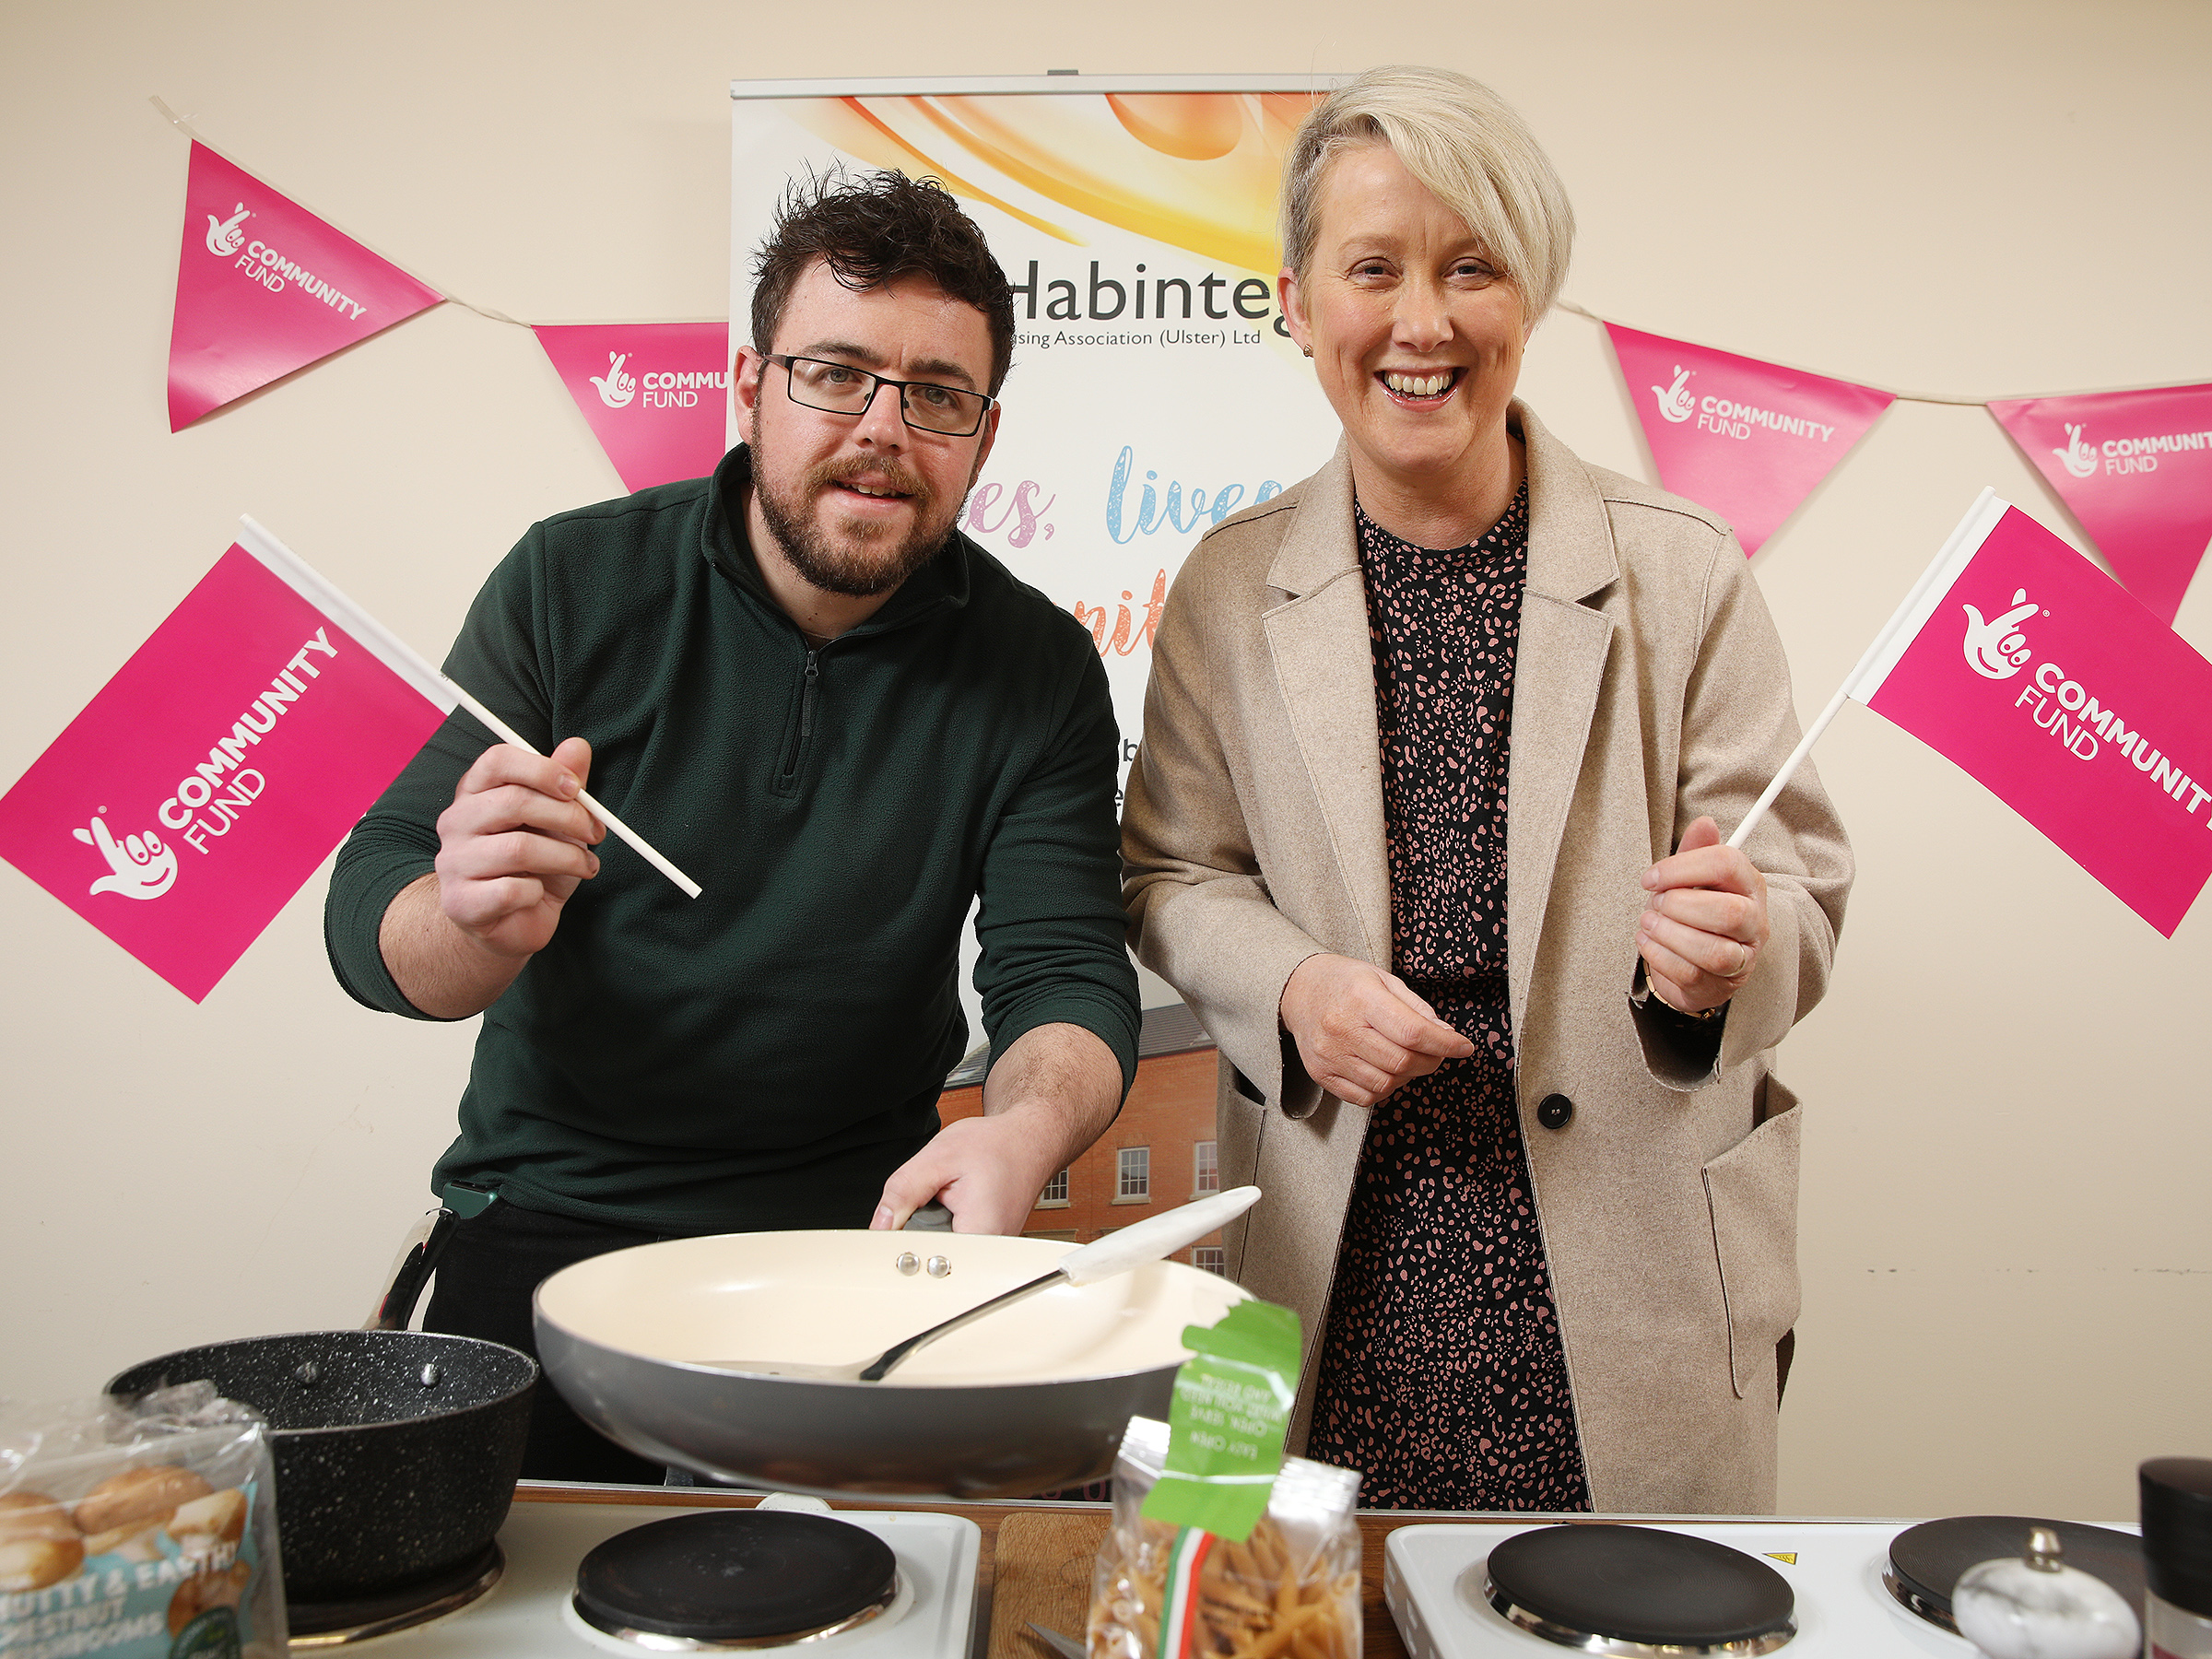 National Lottery funding for Habinteg increases access to community programmes